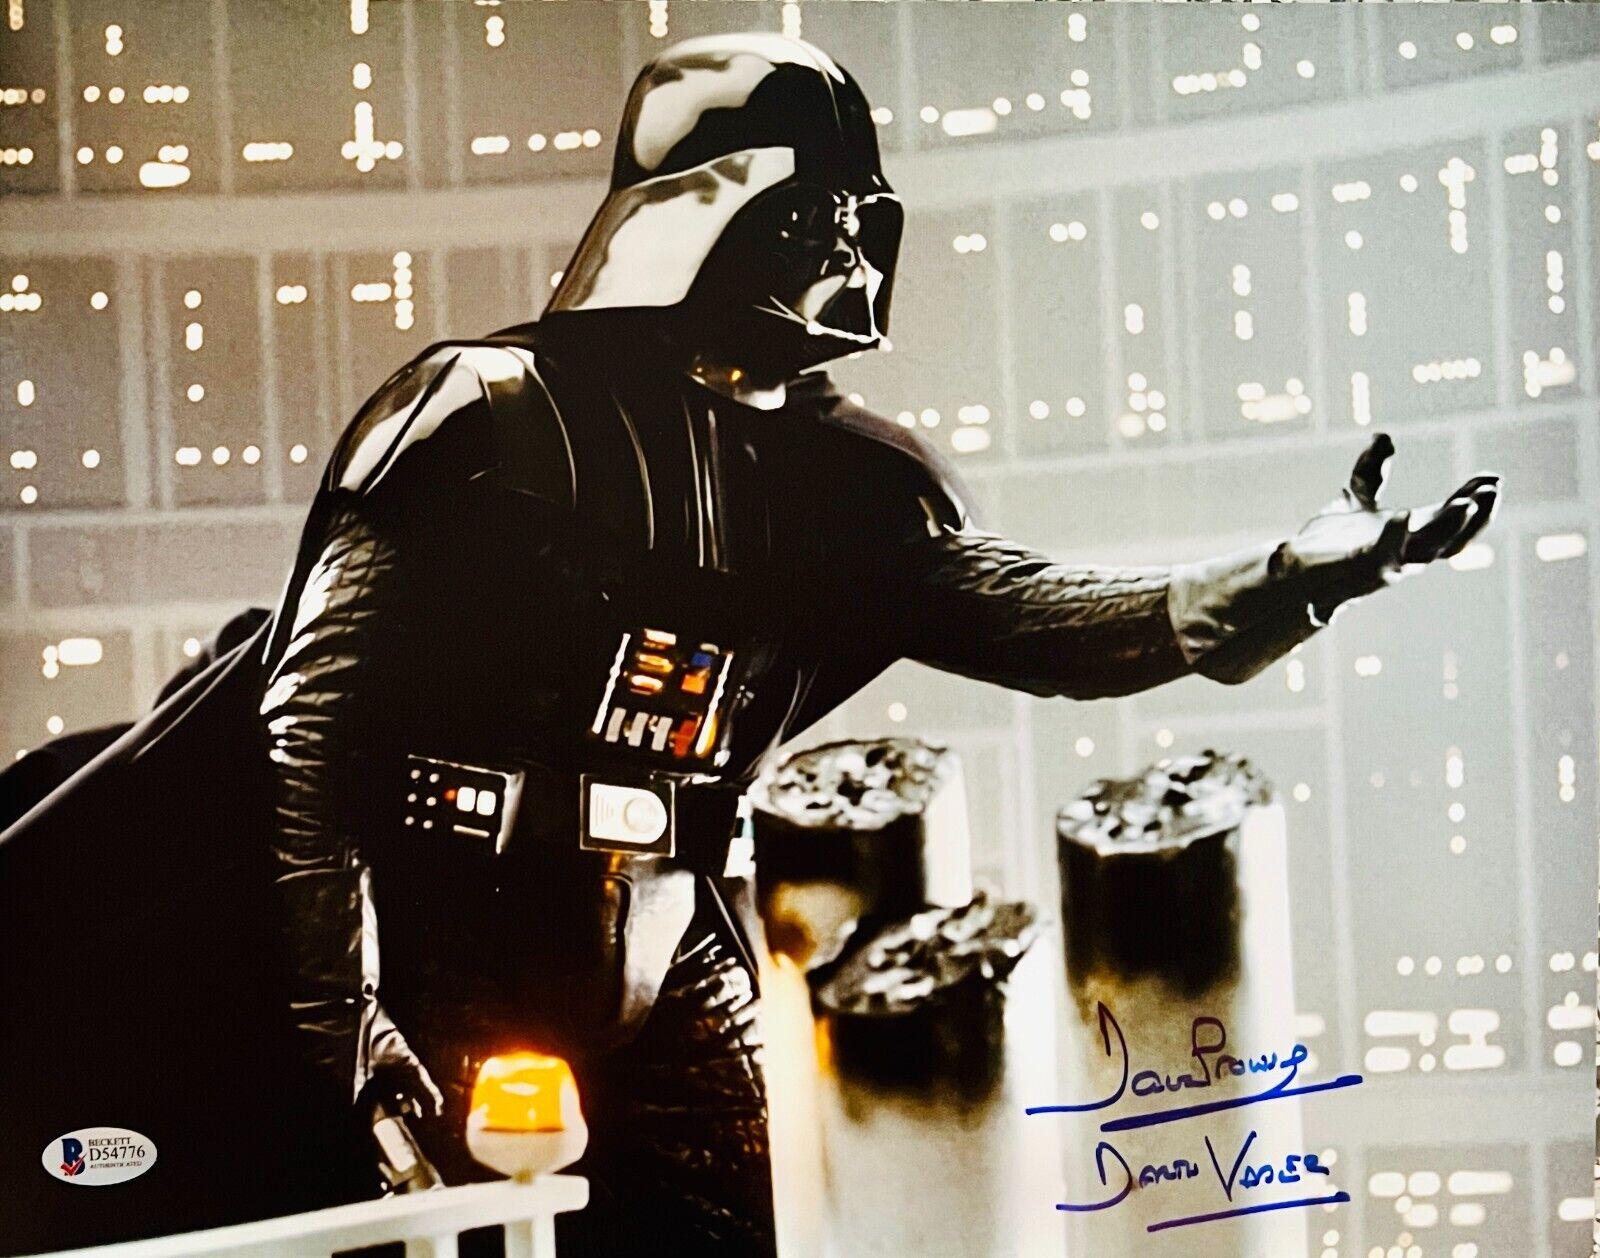 David Prowse Star Wars "Darth Vader" Authentic Signed 11X14 Photo BAS 1